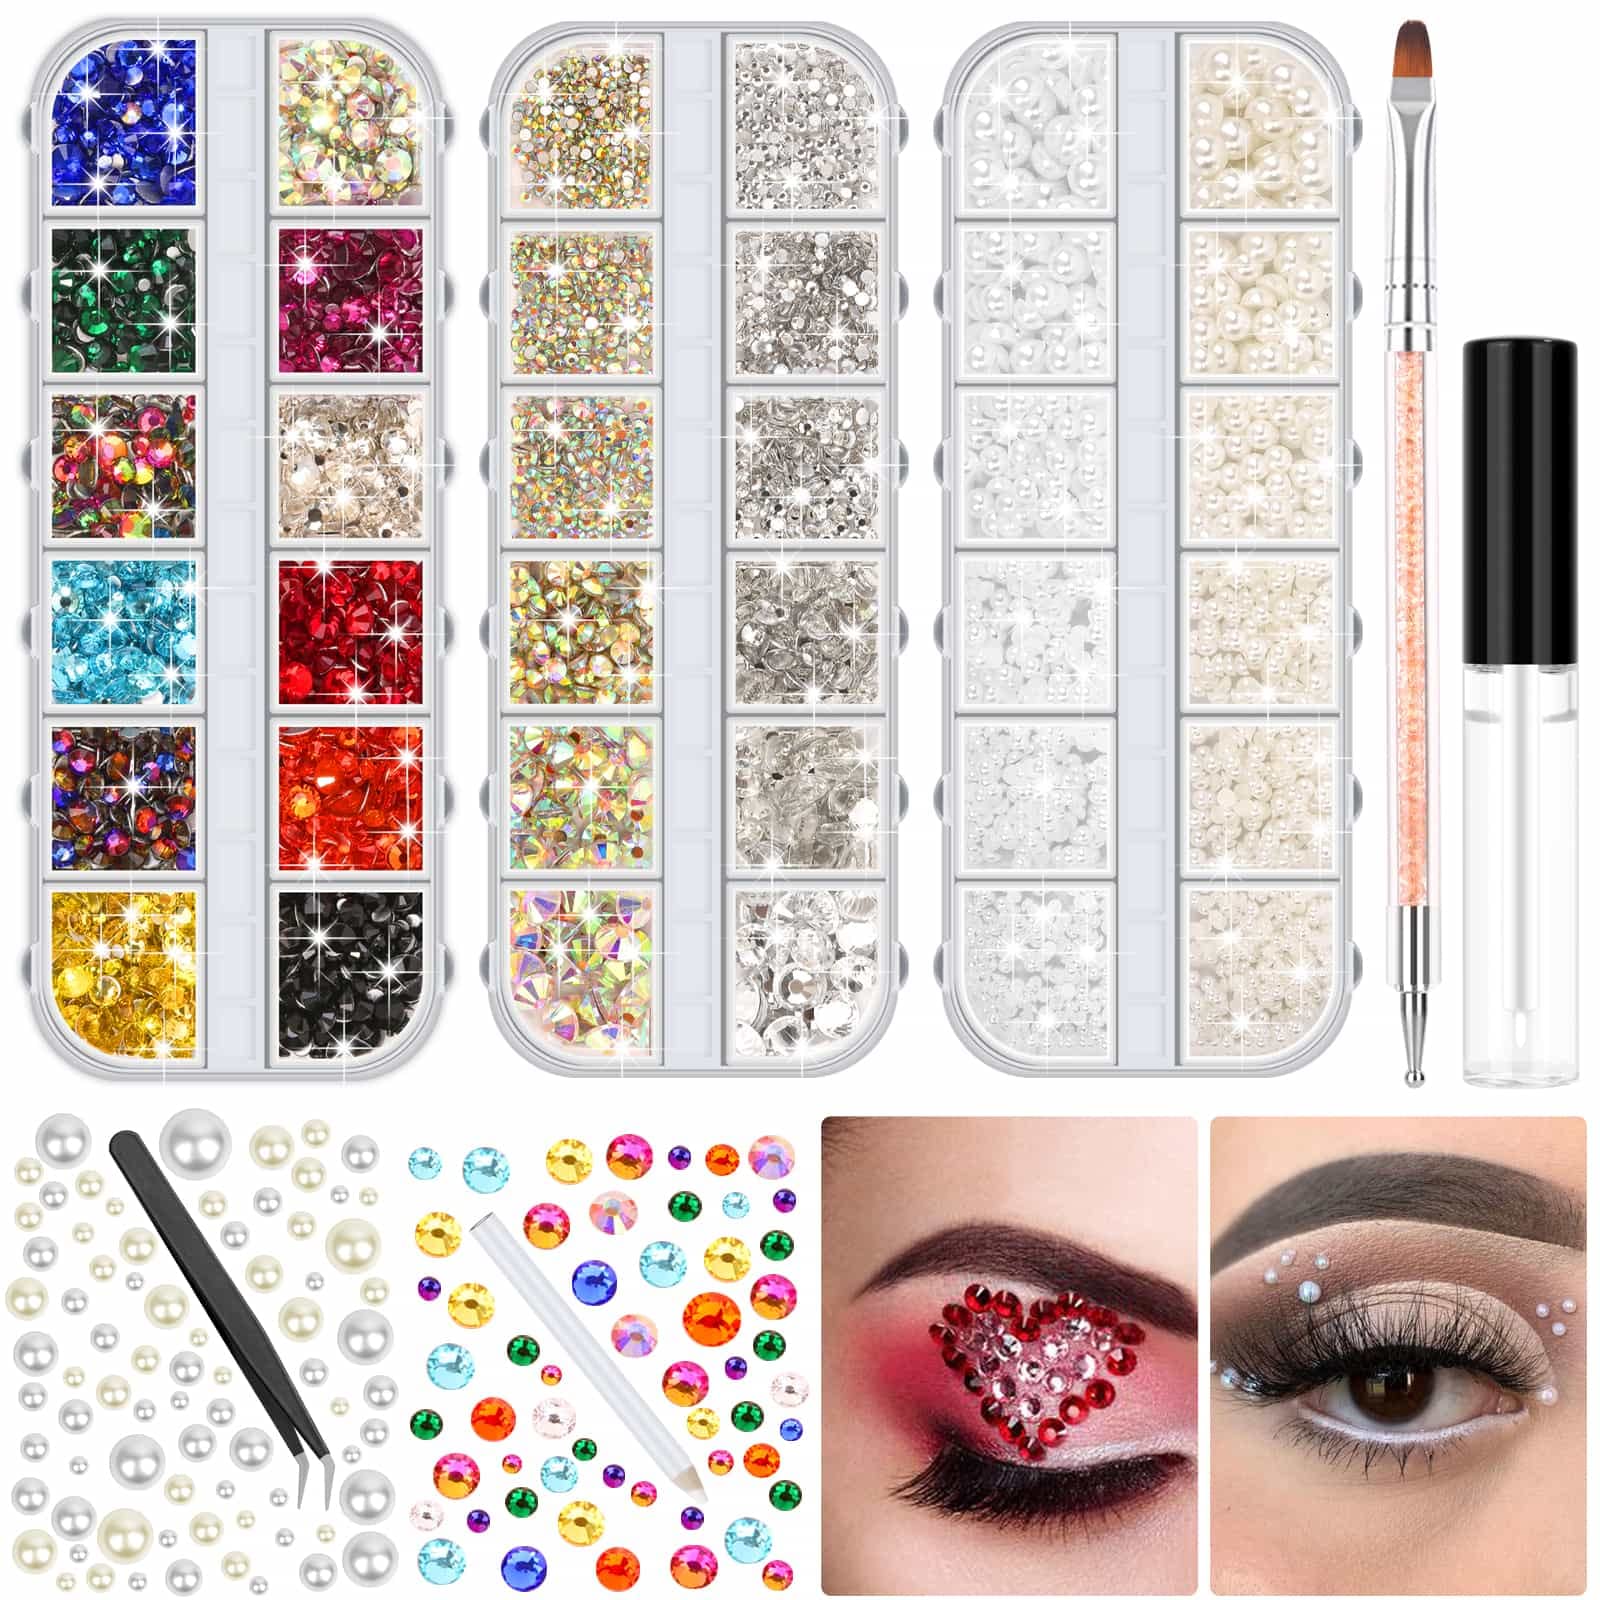 4504 Pcs Face Gems&Pearls with Glue for Makeup Eye Jewels Rhinestones  Makeup Gems White&Beige Face Pearls with Pickup Dotting Tools for Face Eye  Makeup Nail Art Craft Decorations